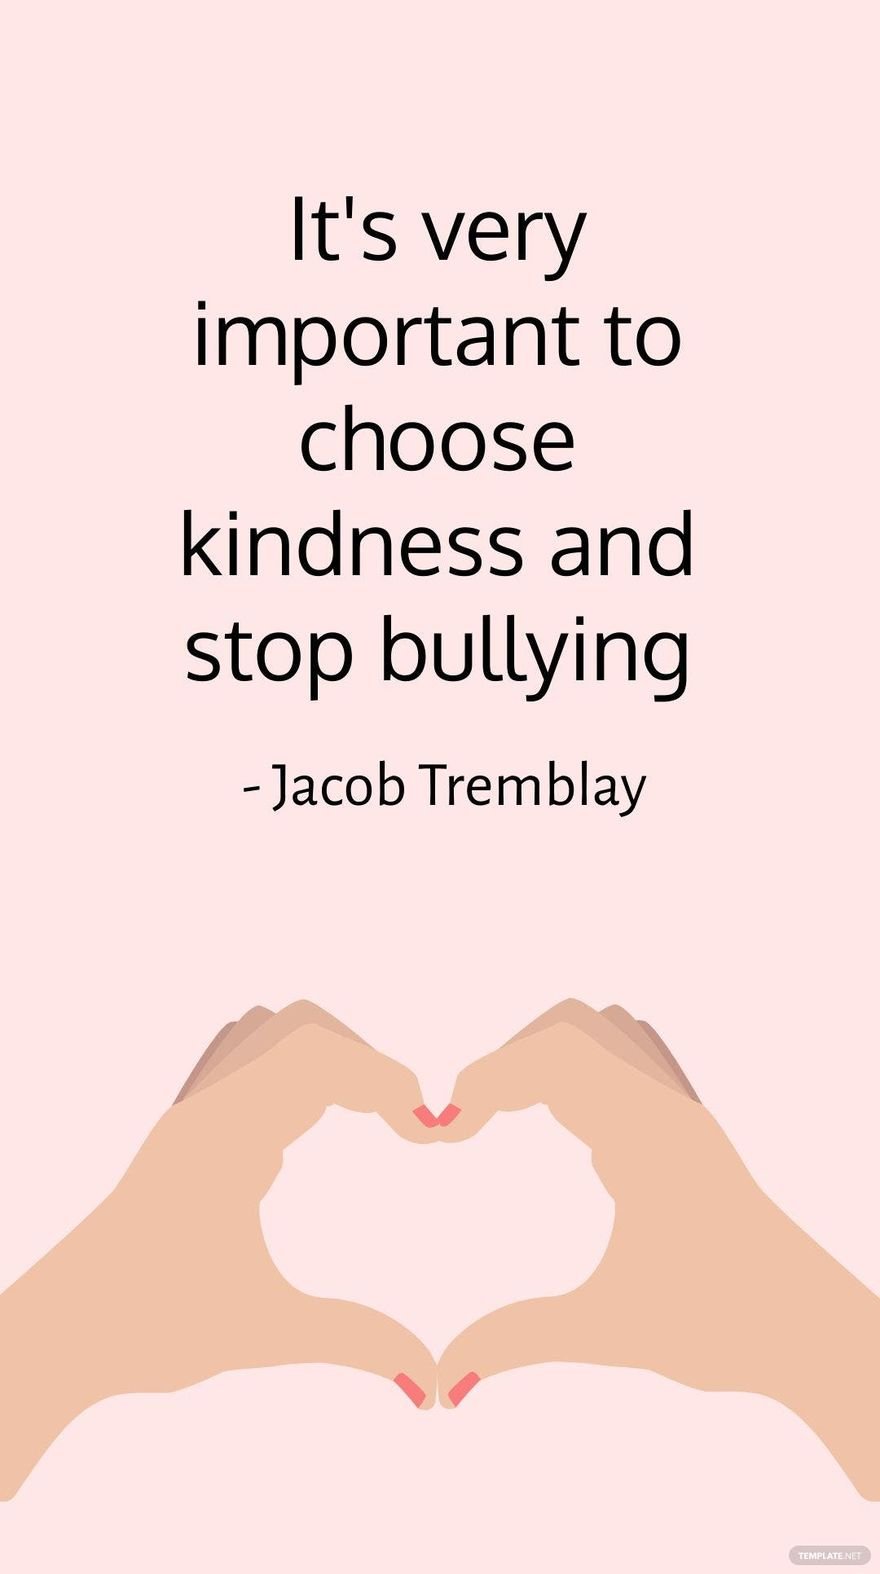 Free Jacob Tremblay - It's very important to choose kindness and stop bullying in JPG